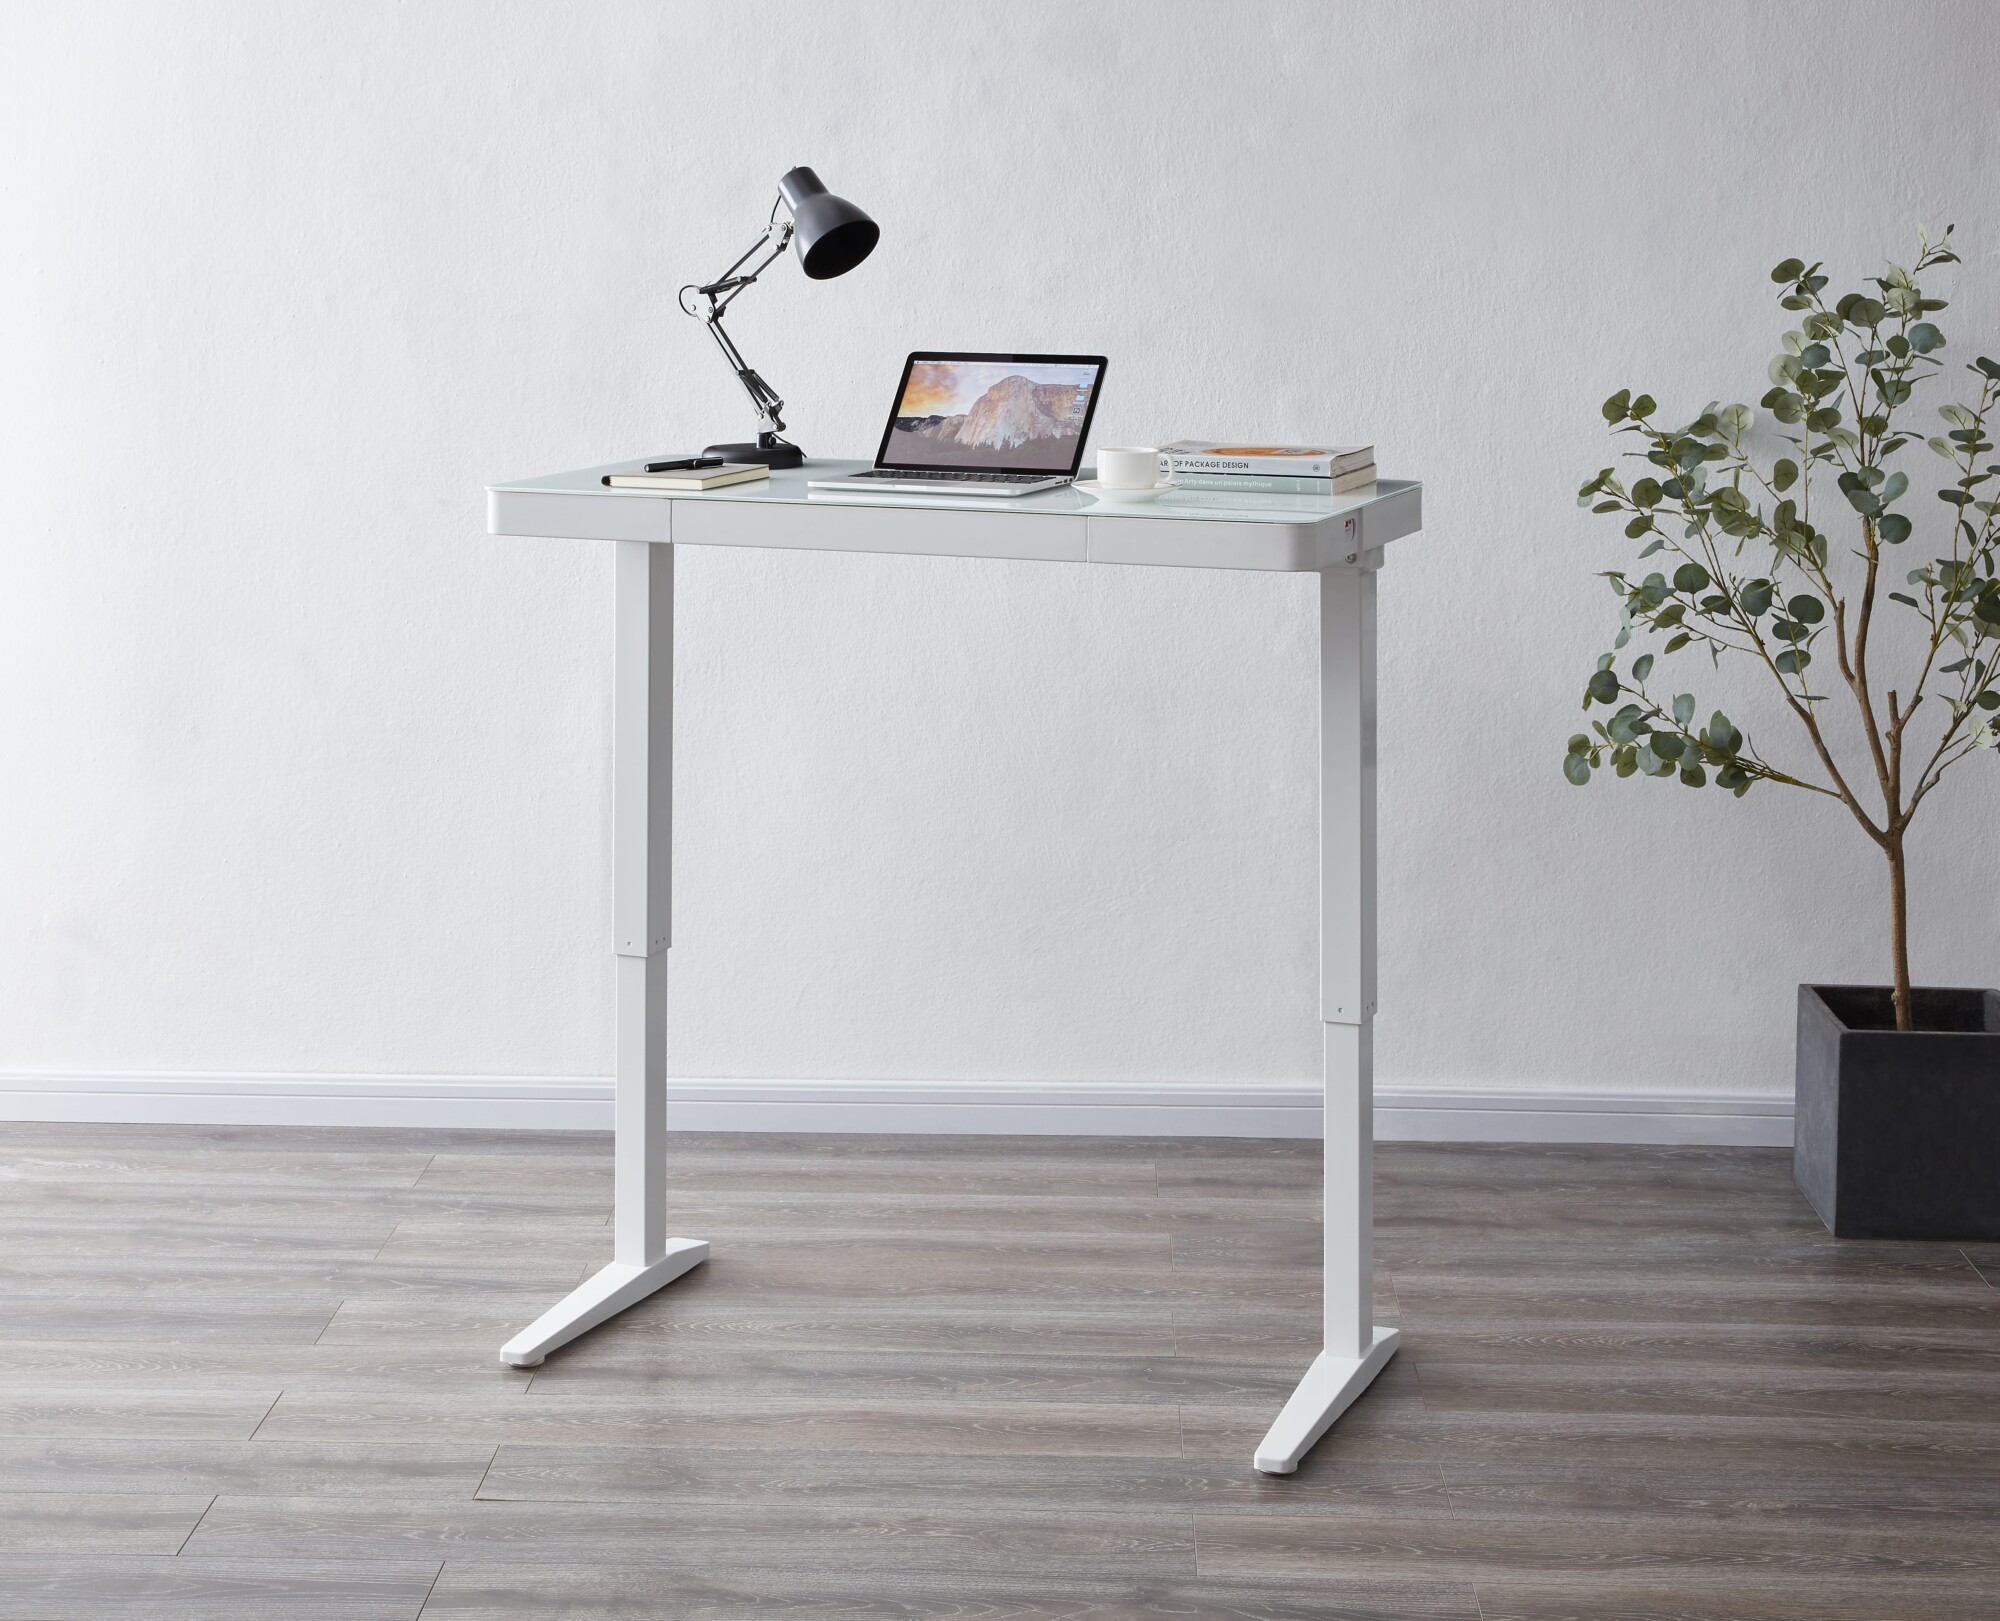 The Lana Smart Electric Height-Adjustable Desk from Koble Designs allows you to work in comfort, with the ability to adjust the height from 74cm to 120cm.